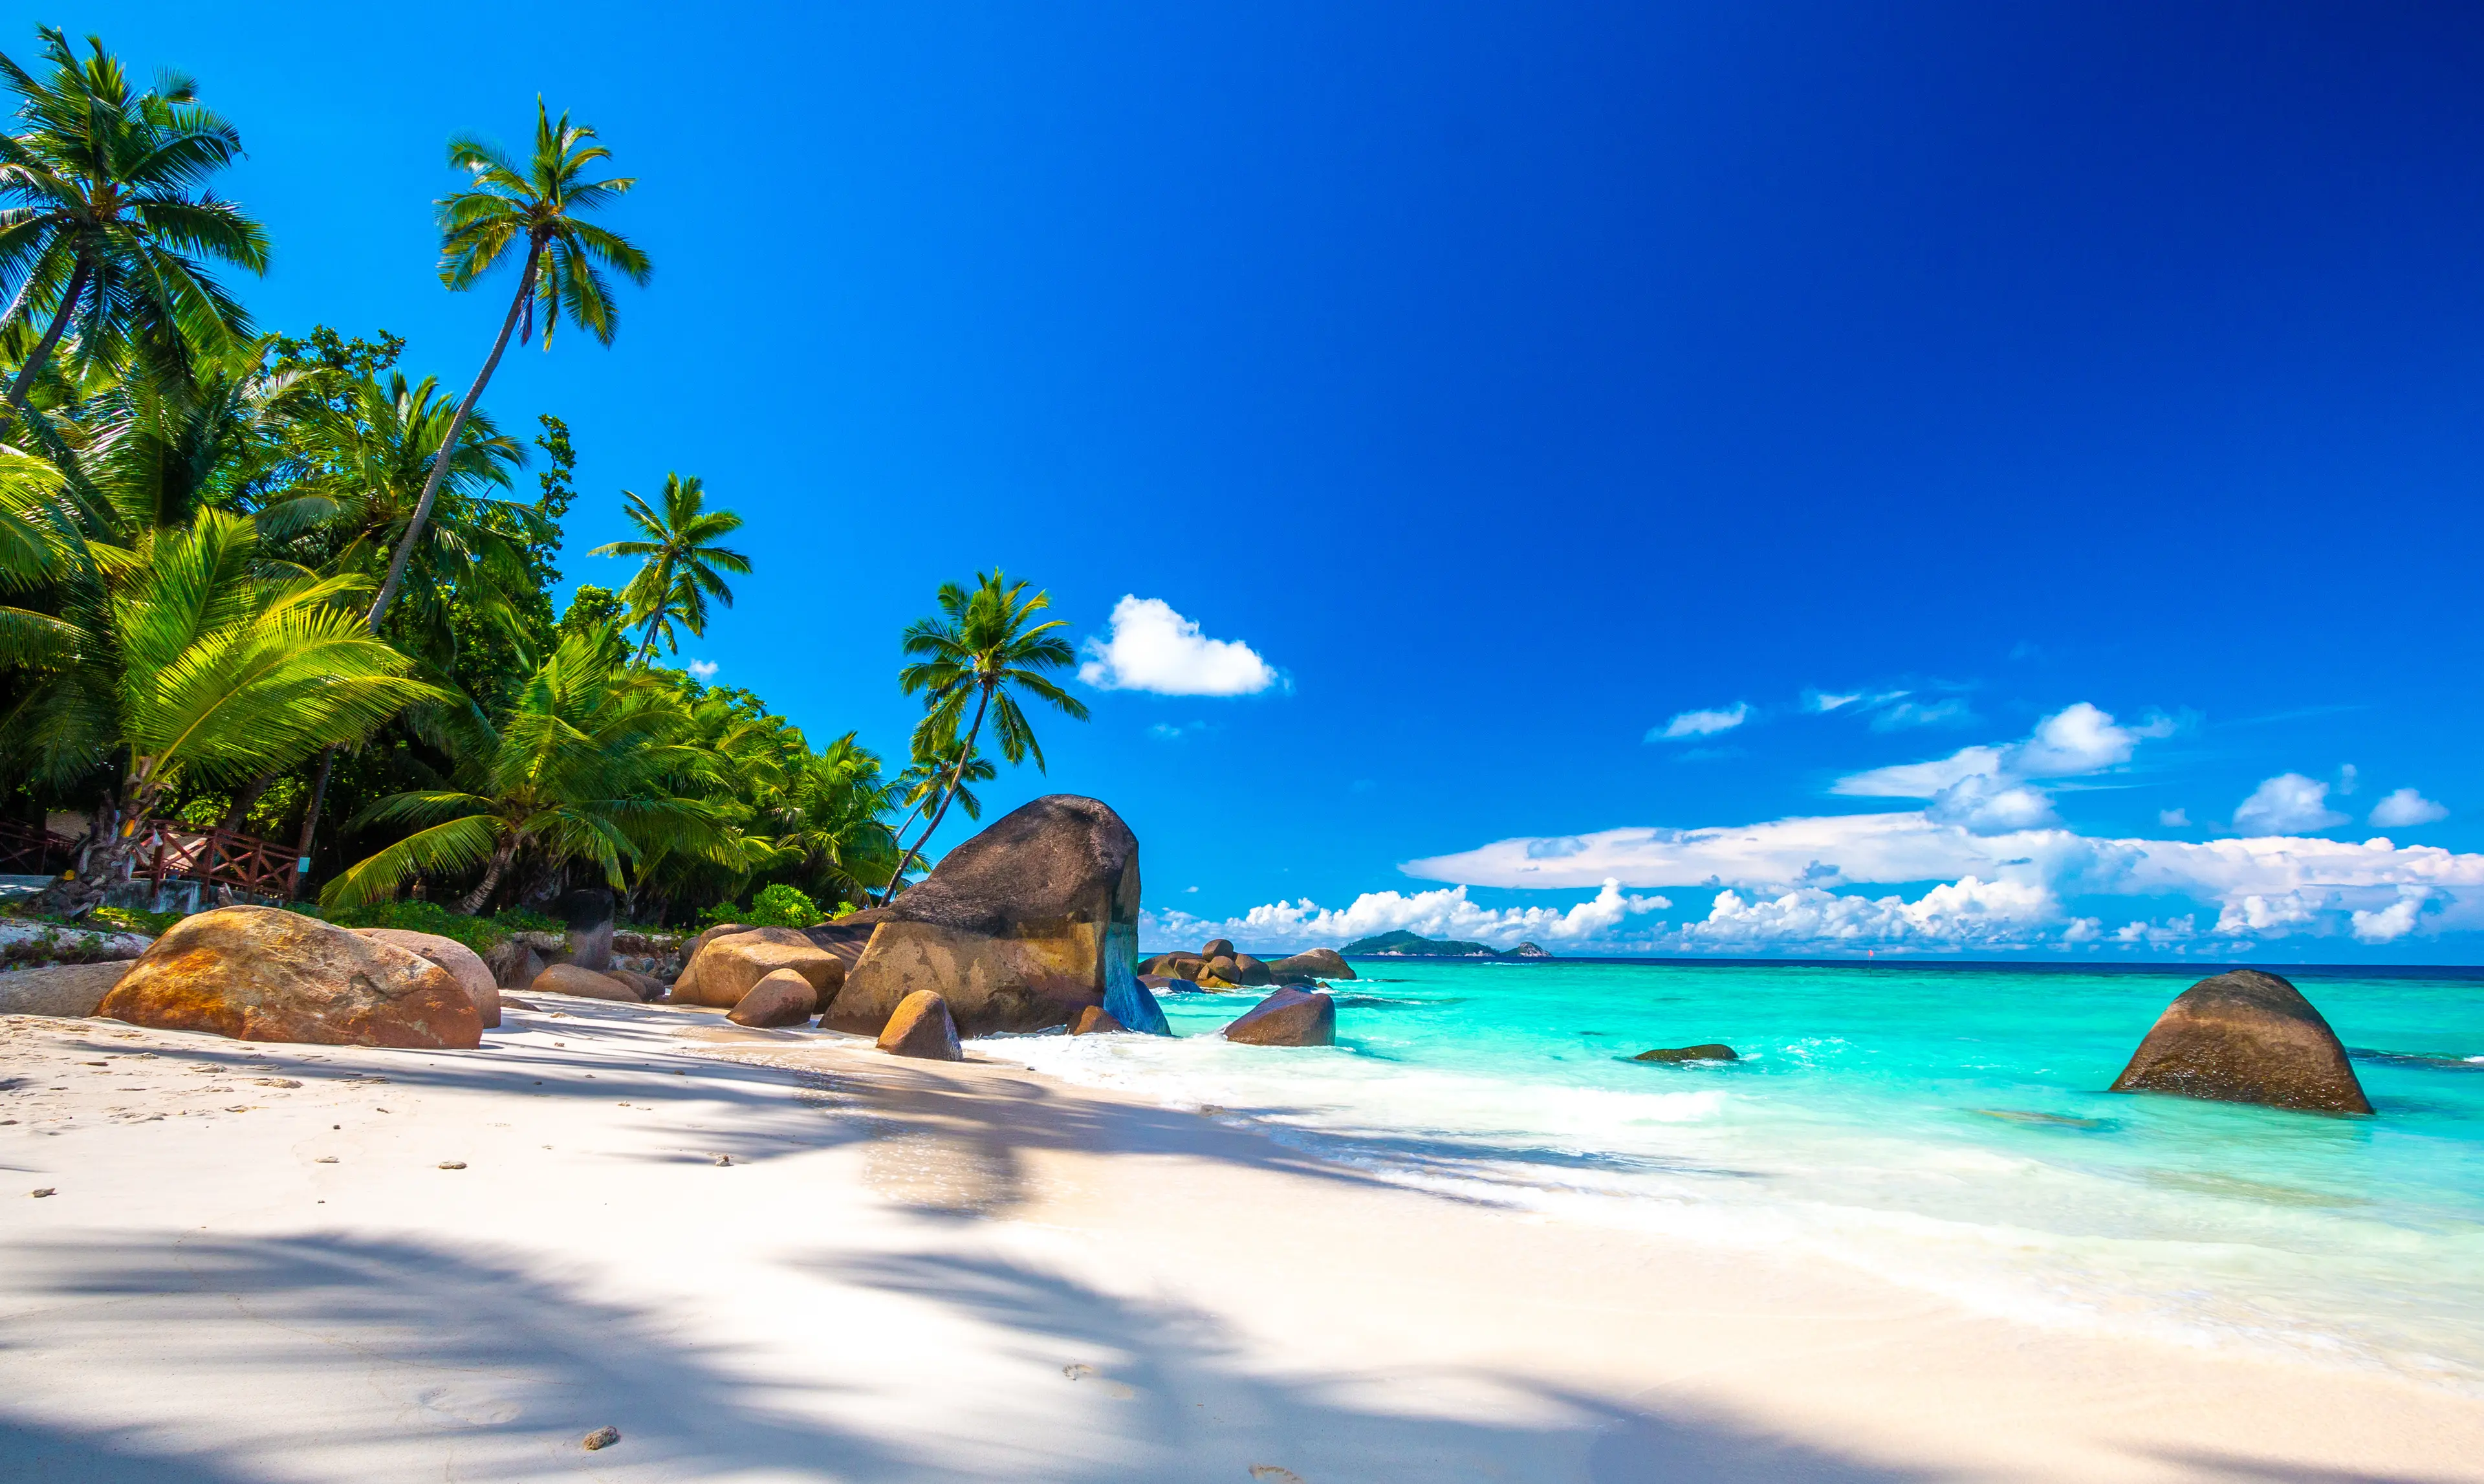 3-Day Exquisite Itinerary for Seychelles Exploration